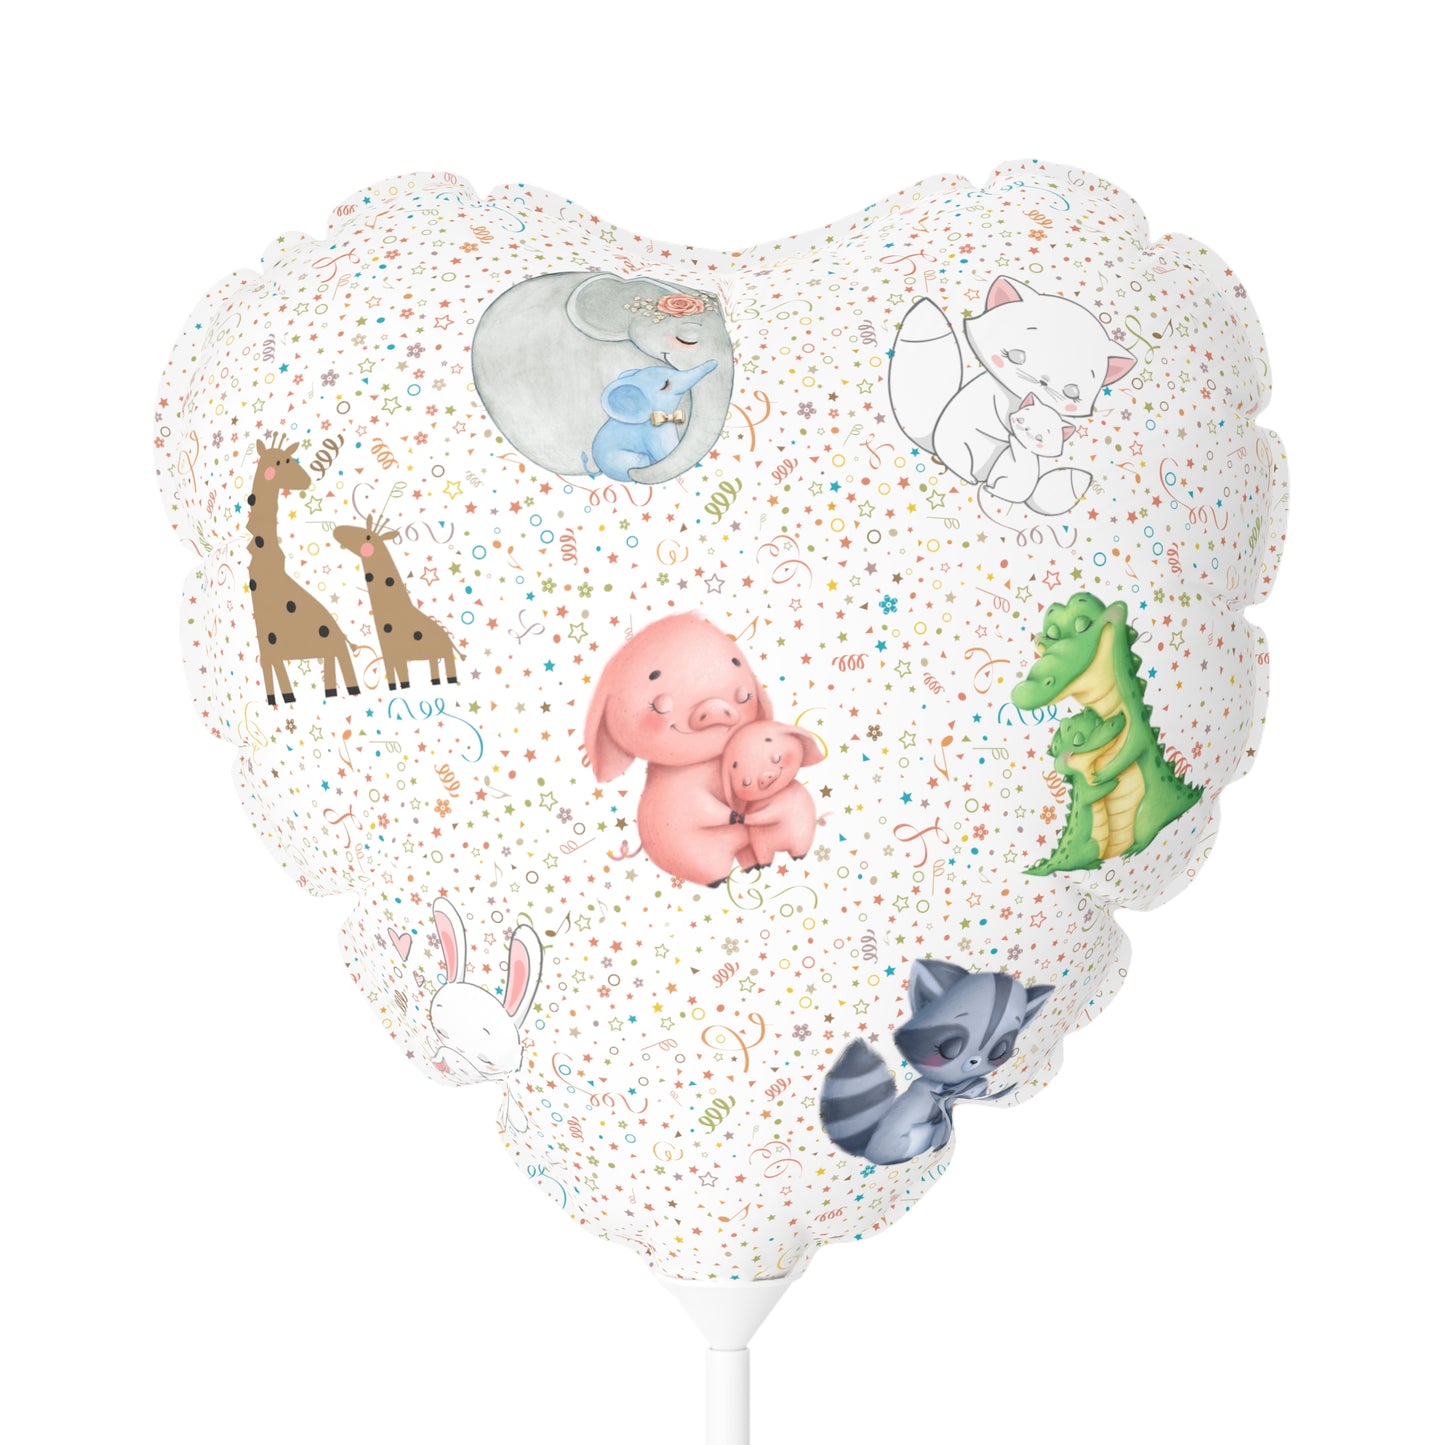 Little Hugs Balloon (Round and Heart-shaped), Air Only 11"